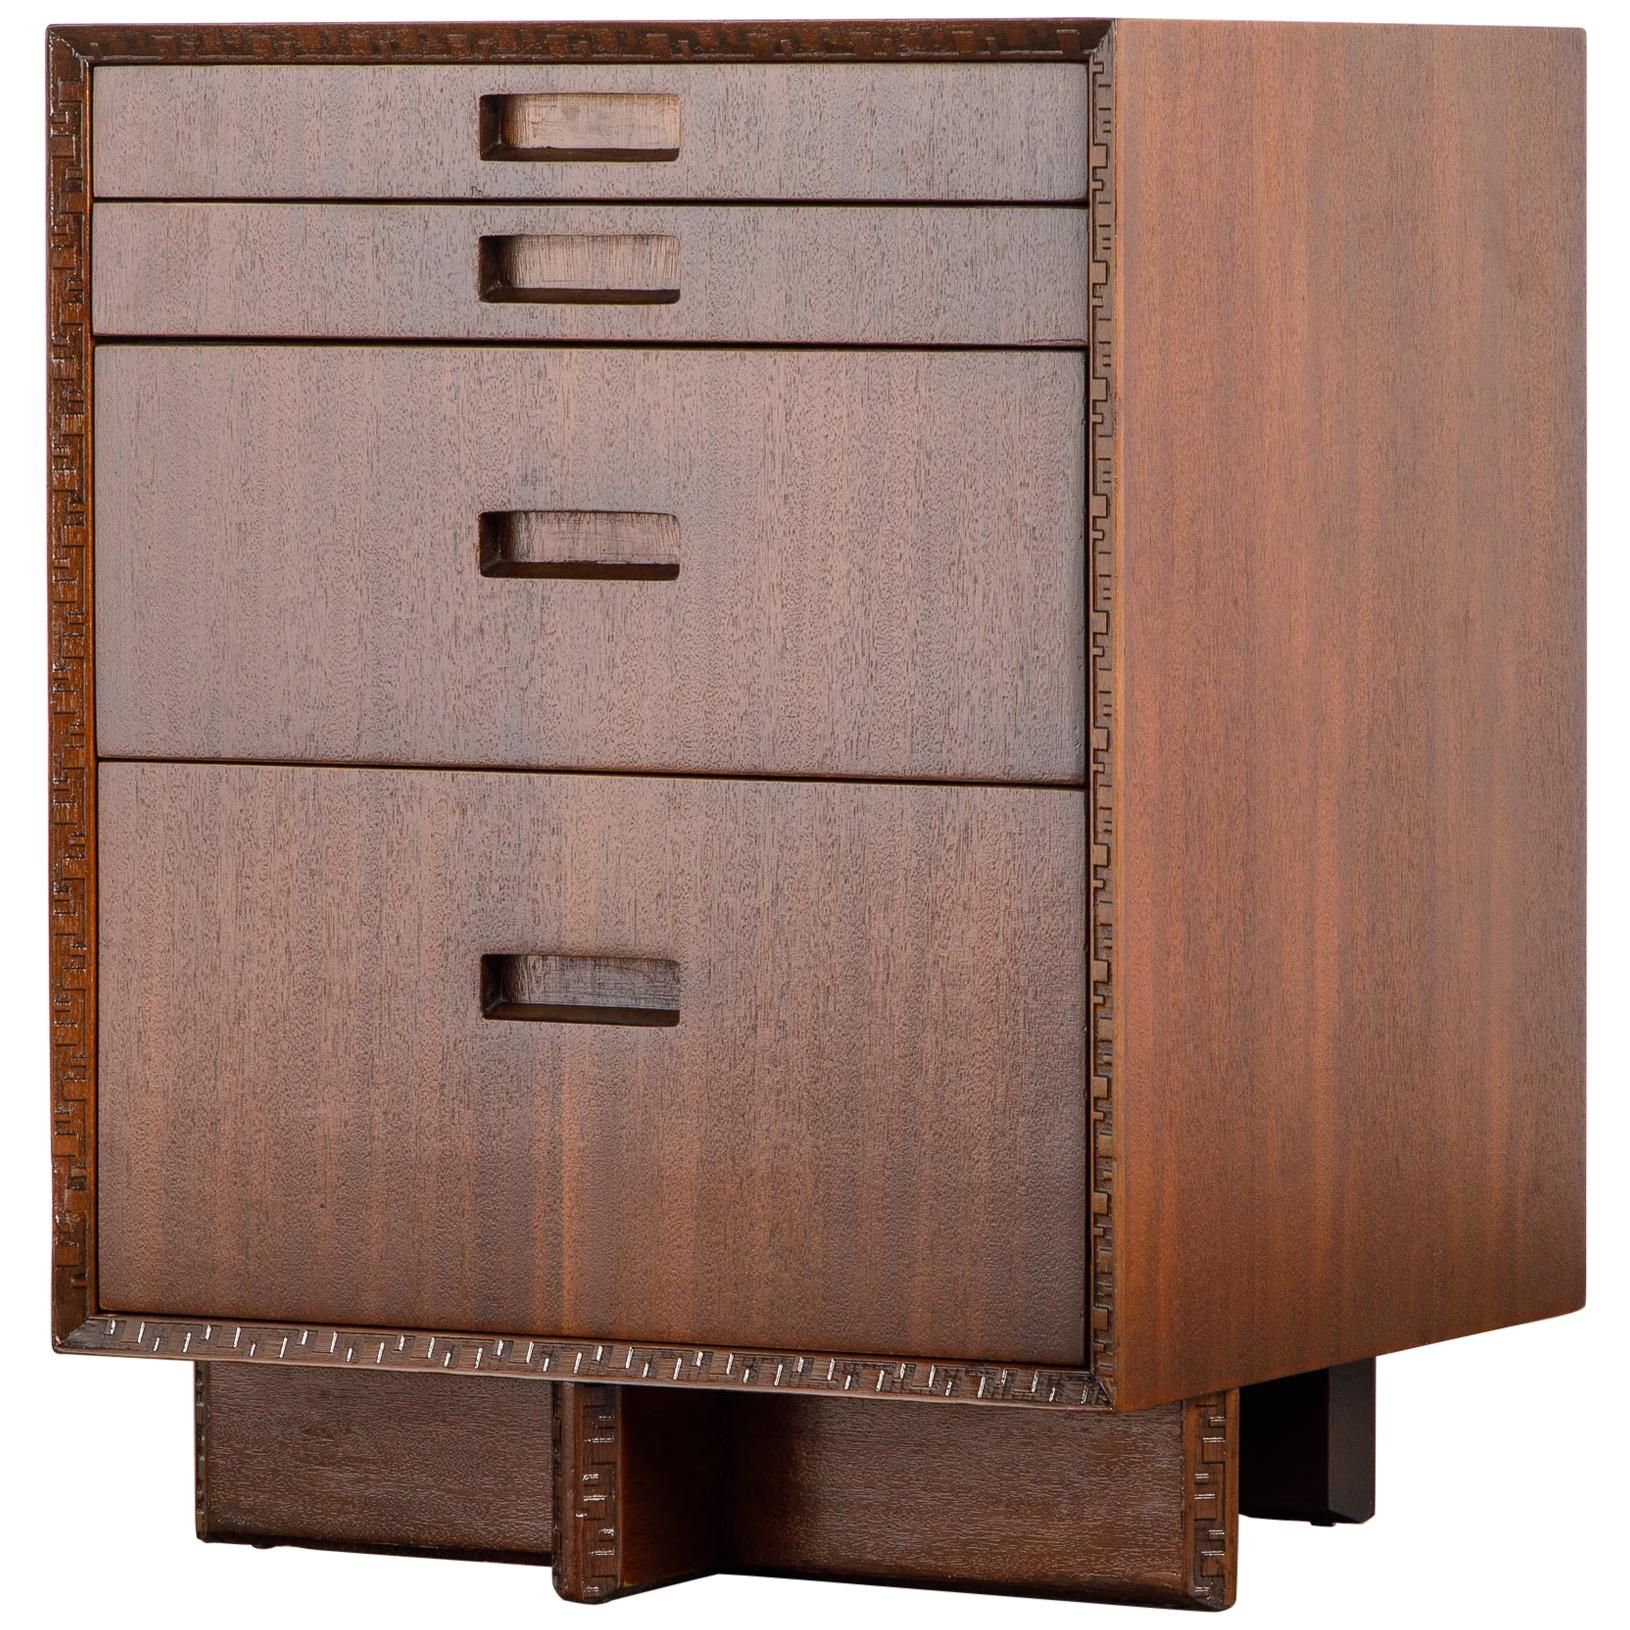 'Taliesin' Mahogany Chest of Drawers by Frank Lloyd Wright, 1955, Signed